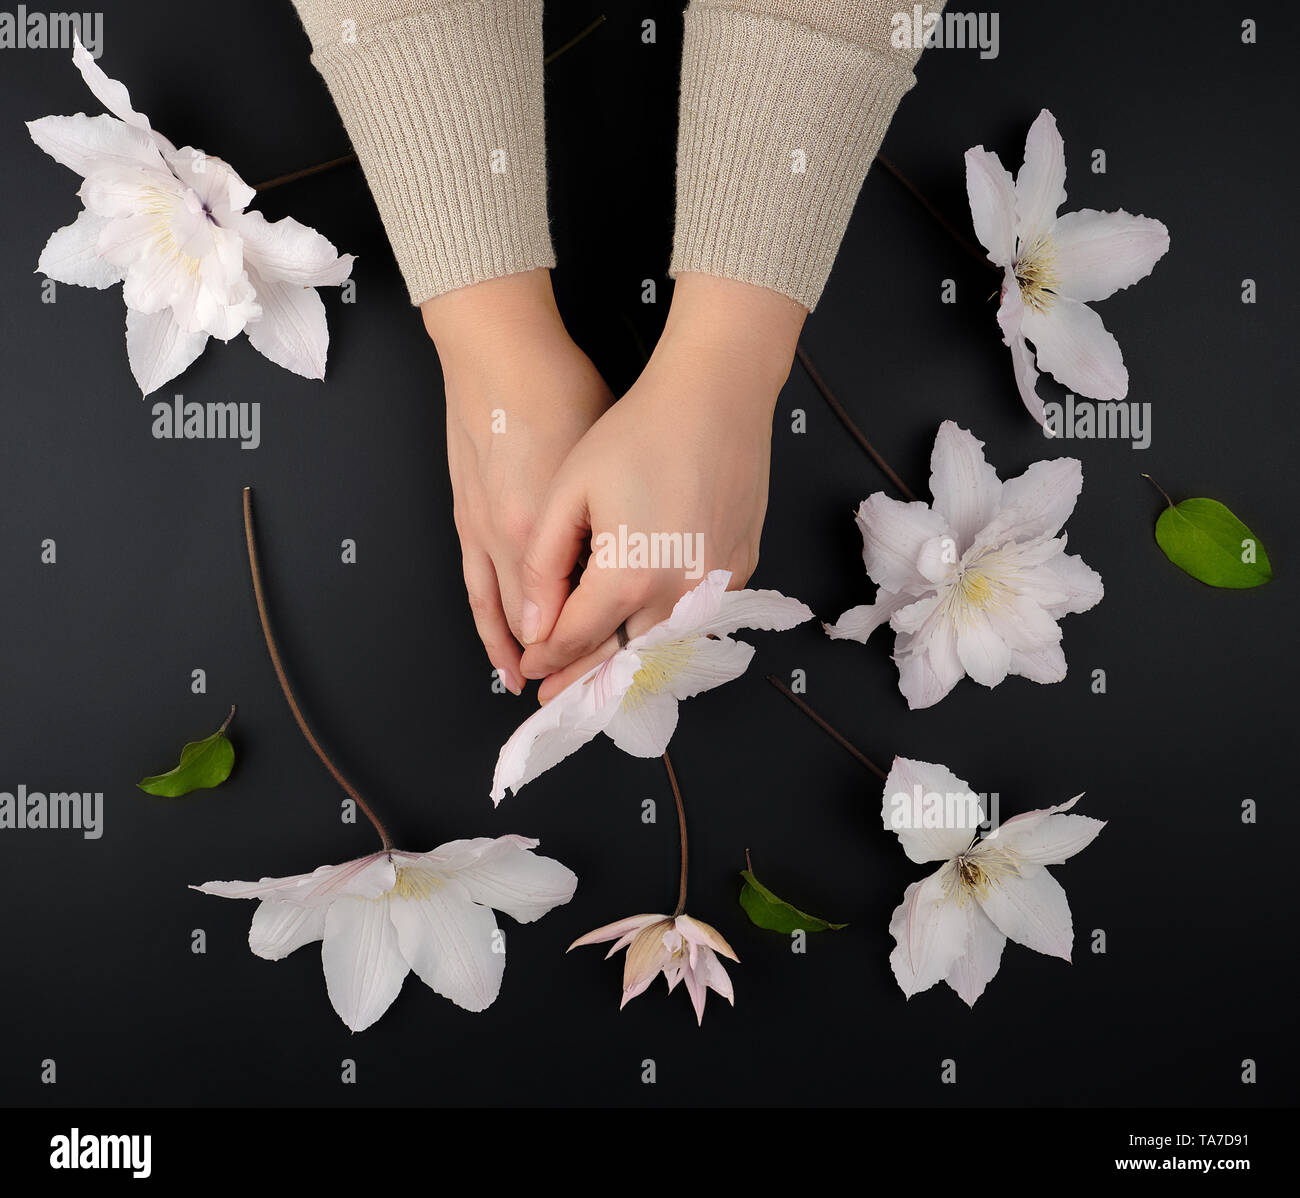 bouquet of white clematis flowers and two female hands on a black background, top view. Hand care concept, spa and anti-aging treatments Stock Photo